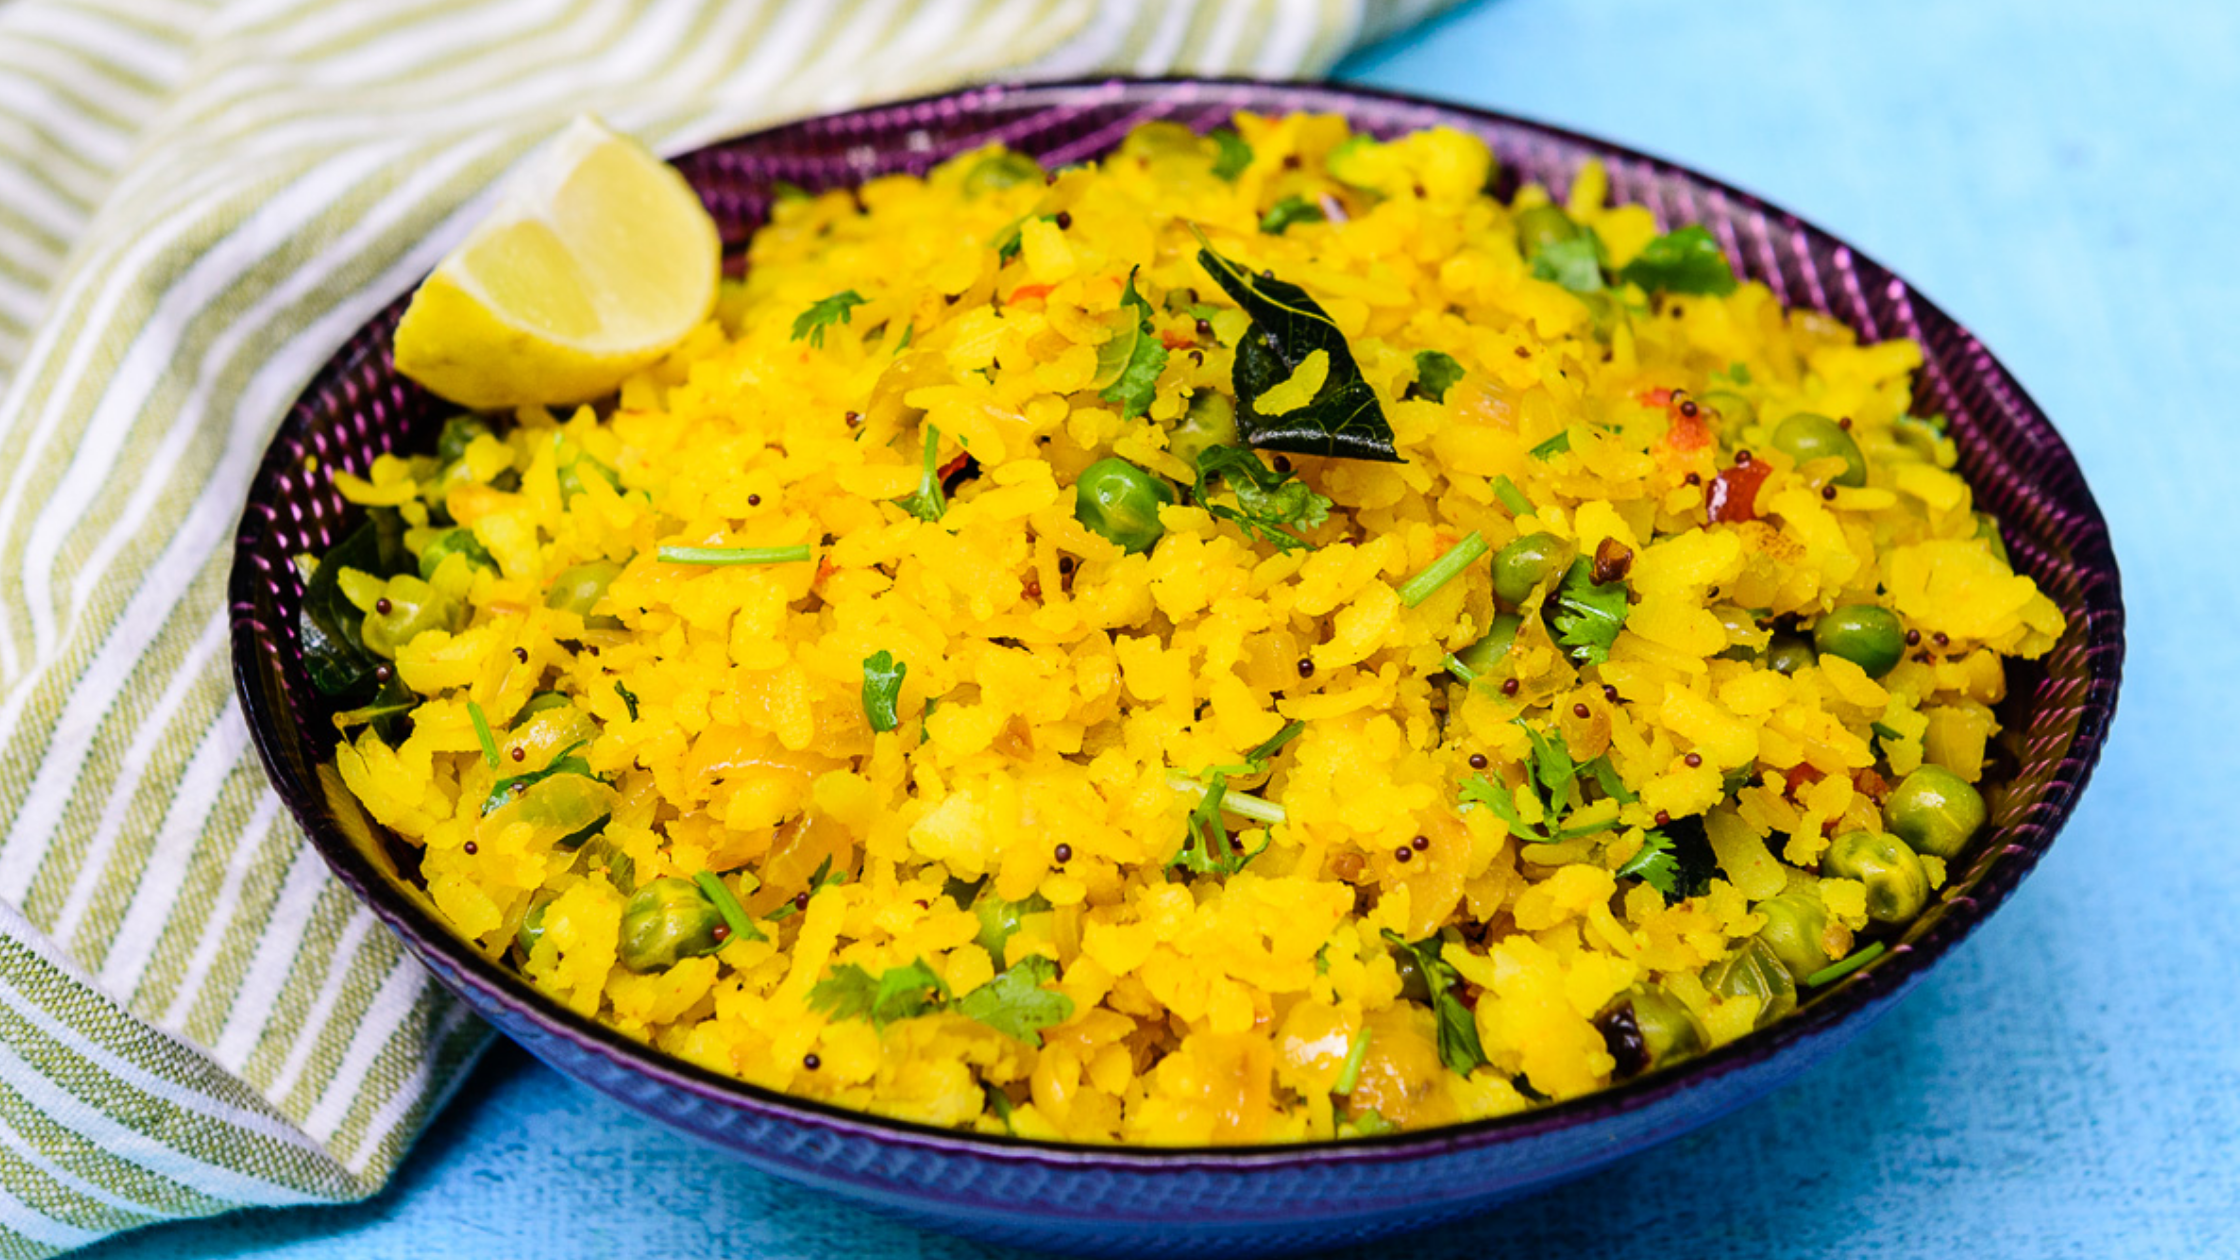 Poha - The Quintessential Indian Breakfast